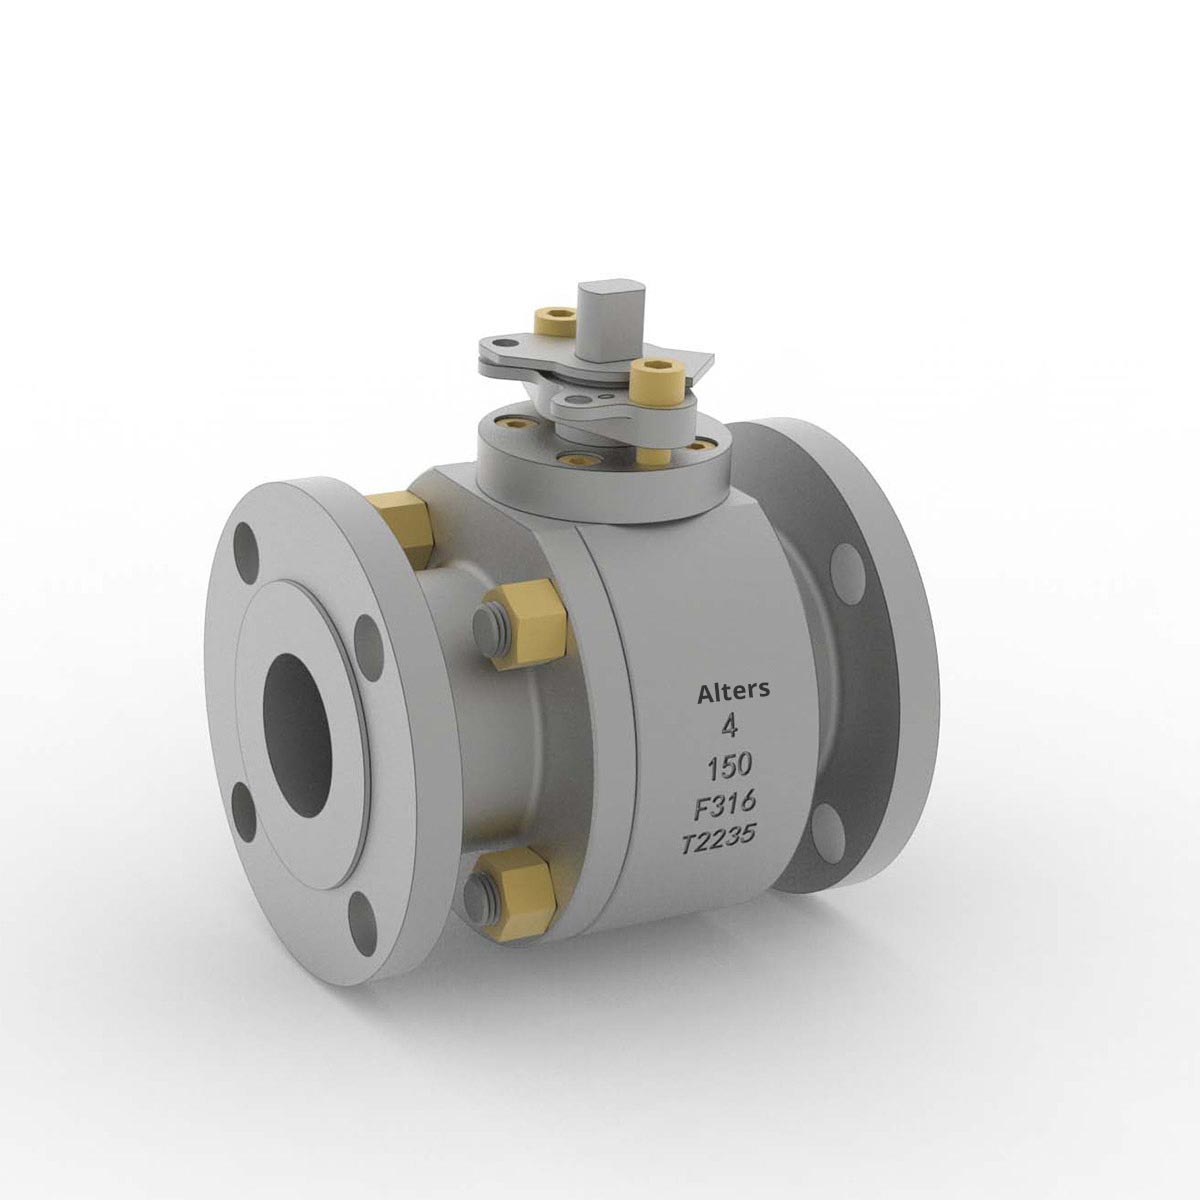 Forged Floating Ball Valve from AlterValve with the company name and specifications.